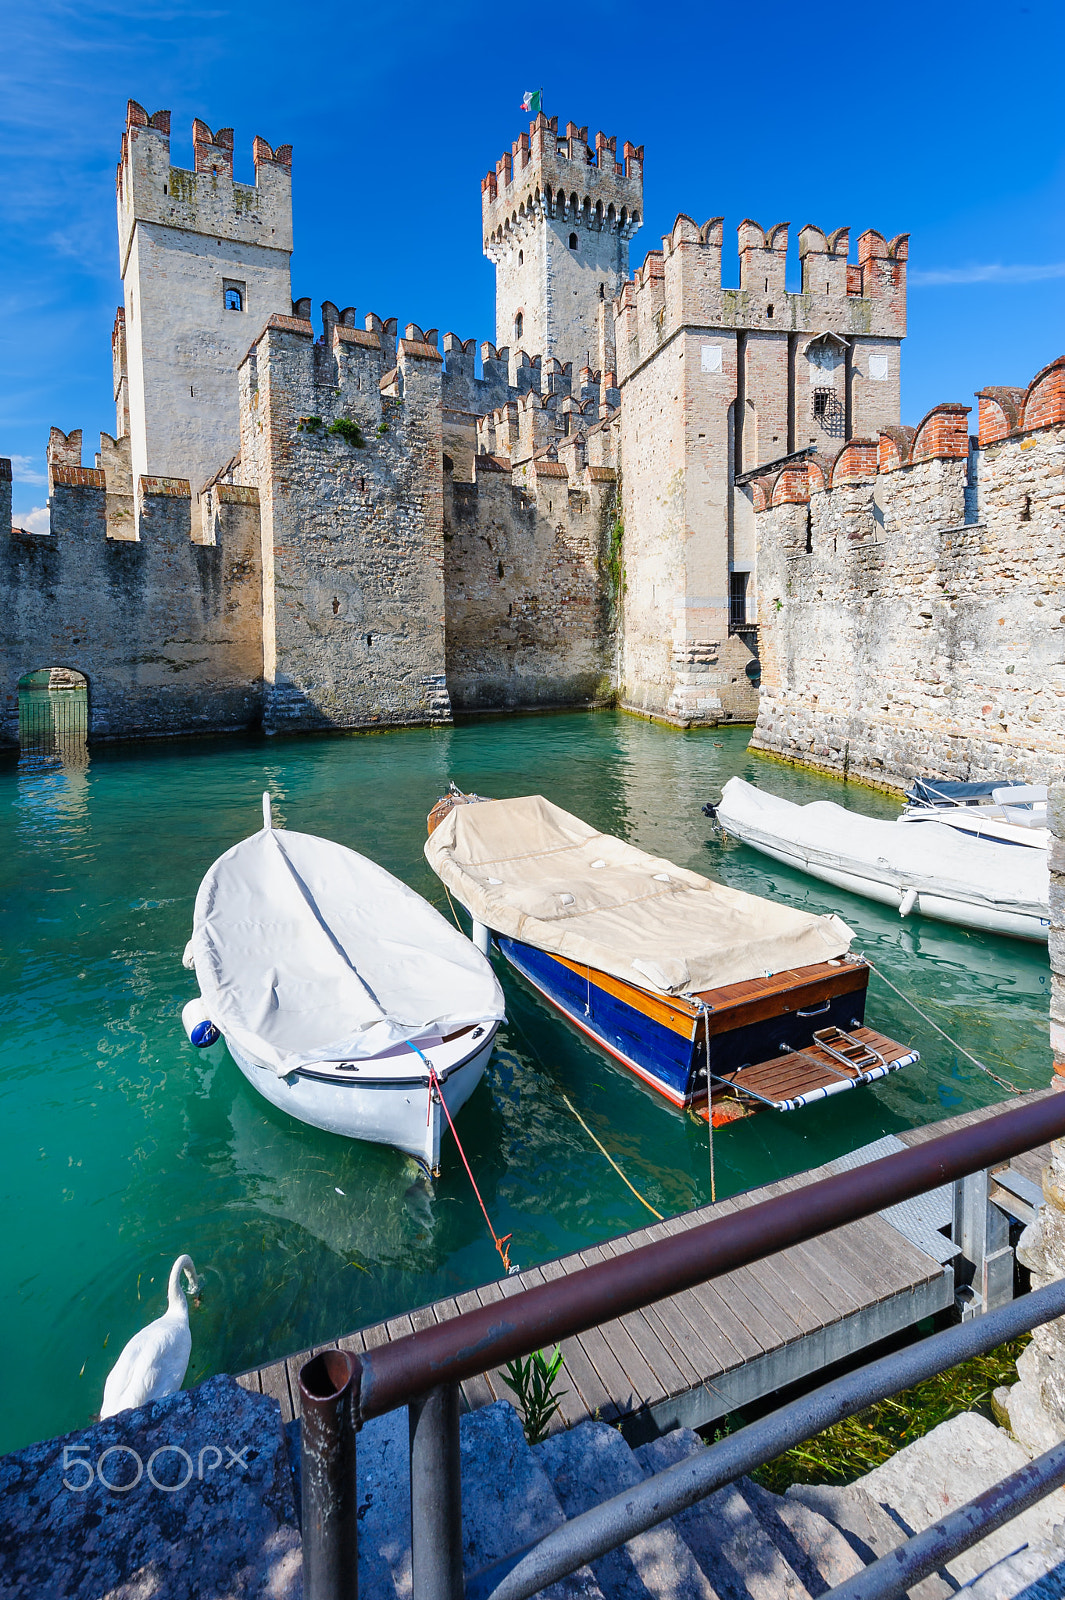 Nikon D700 + Nikon AF-S Nikkor 16-35mm F4G ED VR sample photo. Medieval castle scaliger in old town sirmione on lake lago di garda, northern italy photography